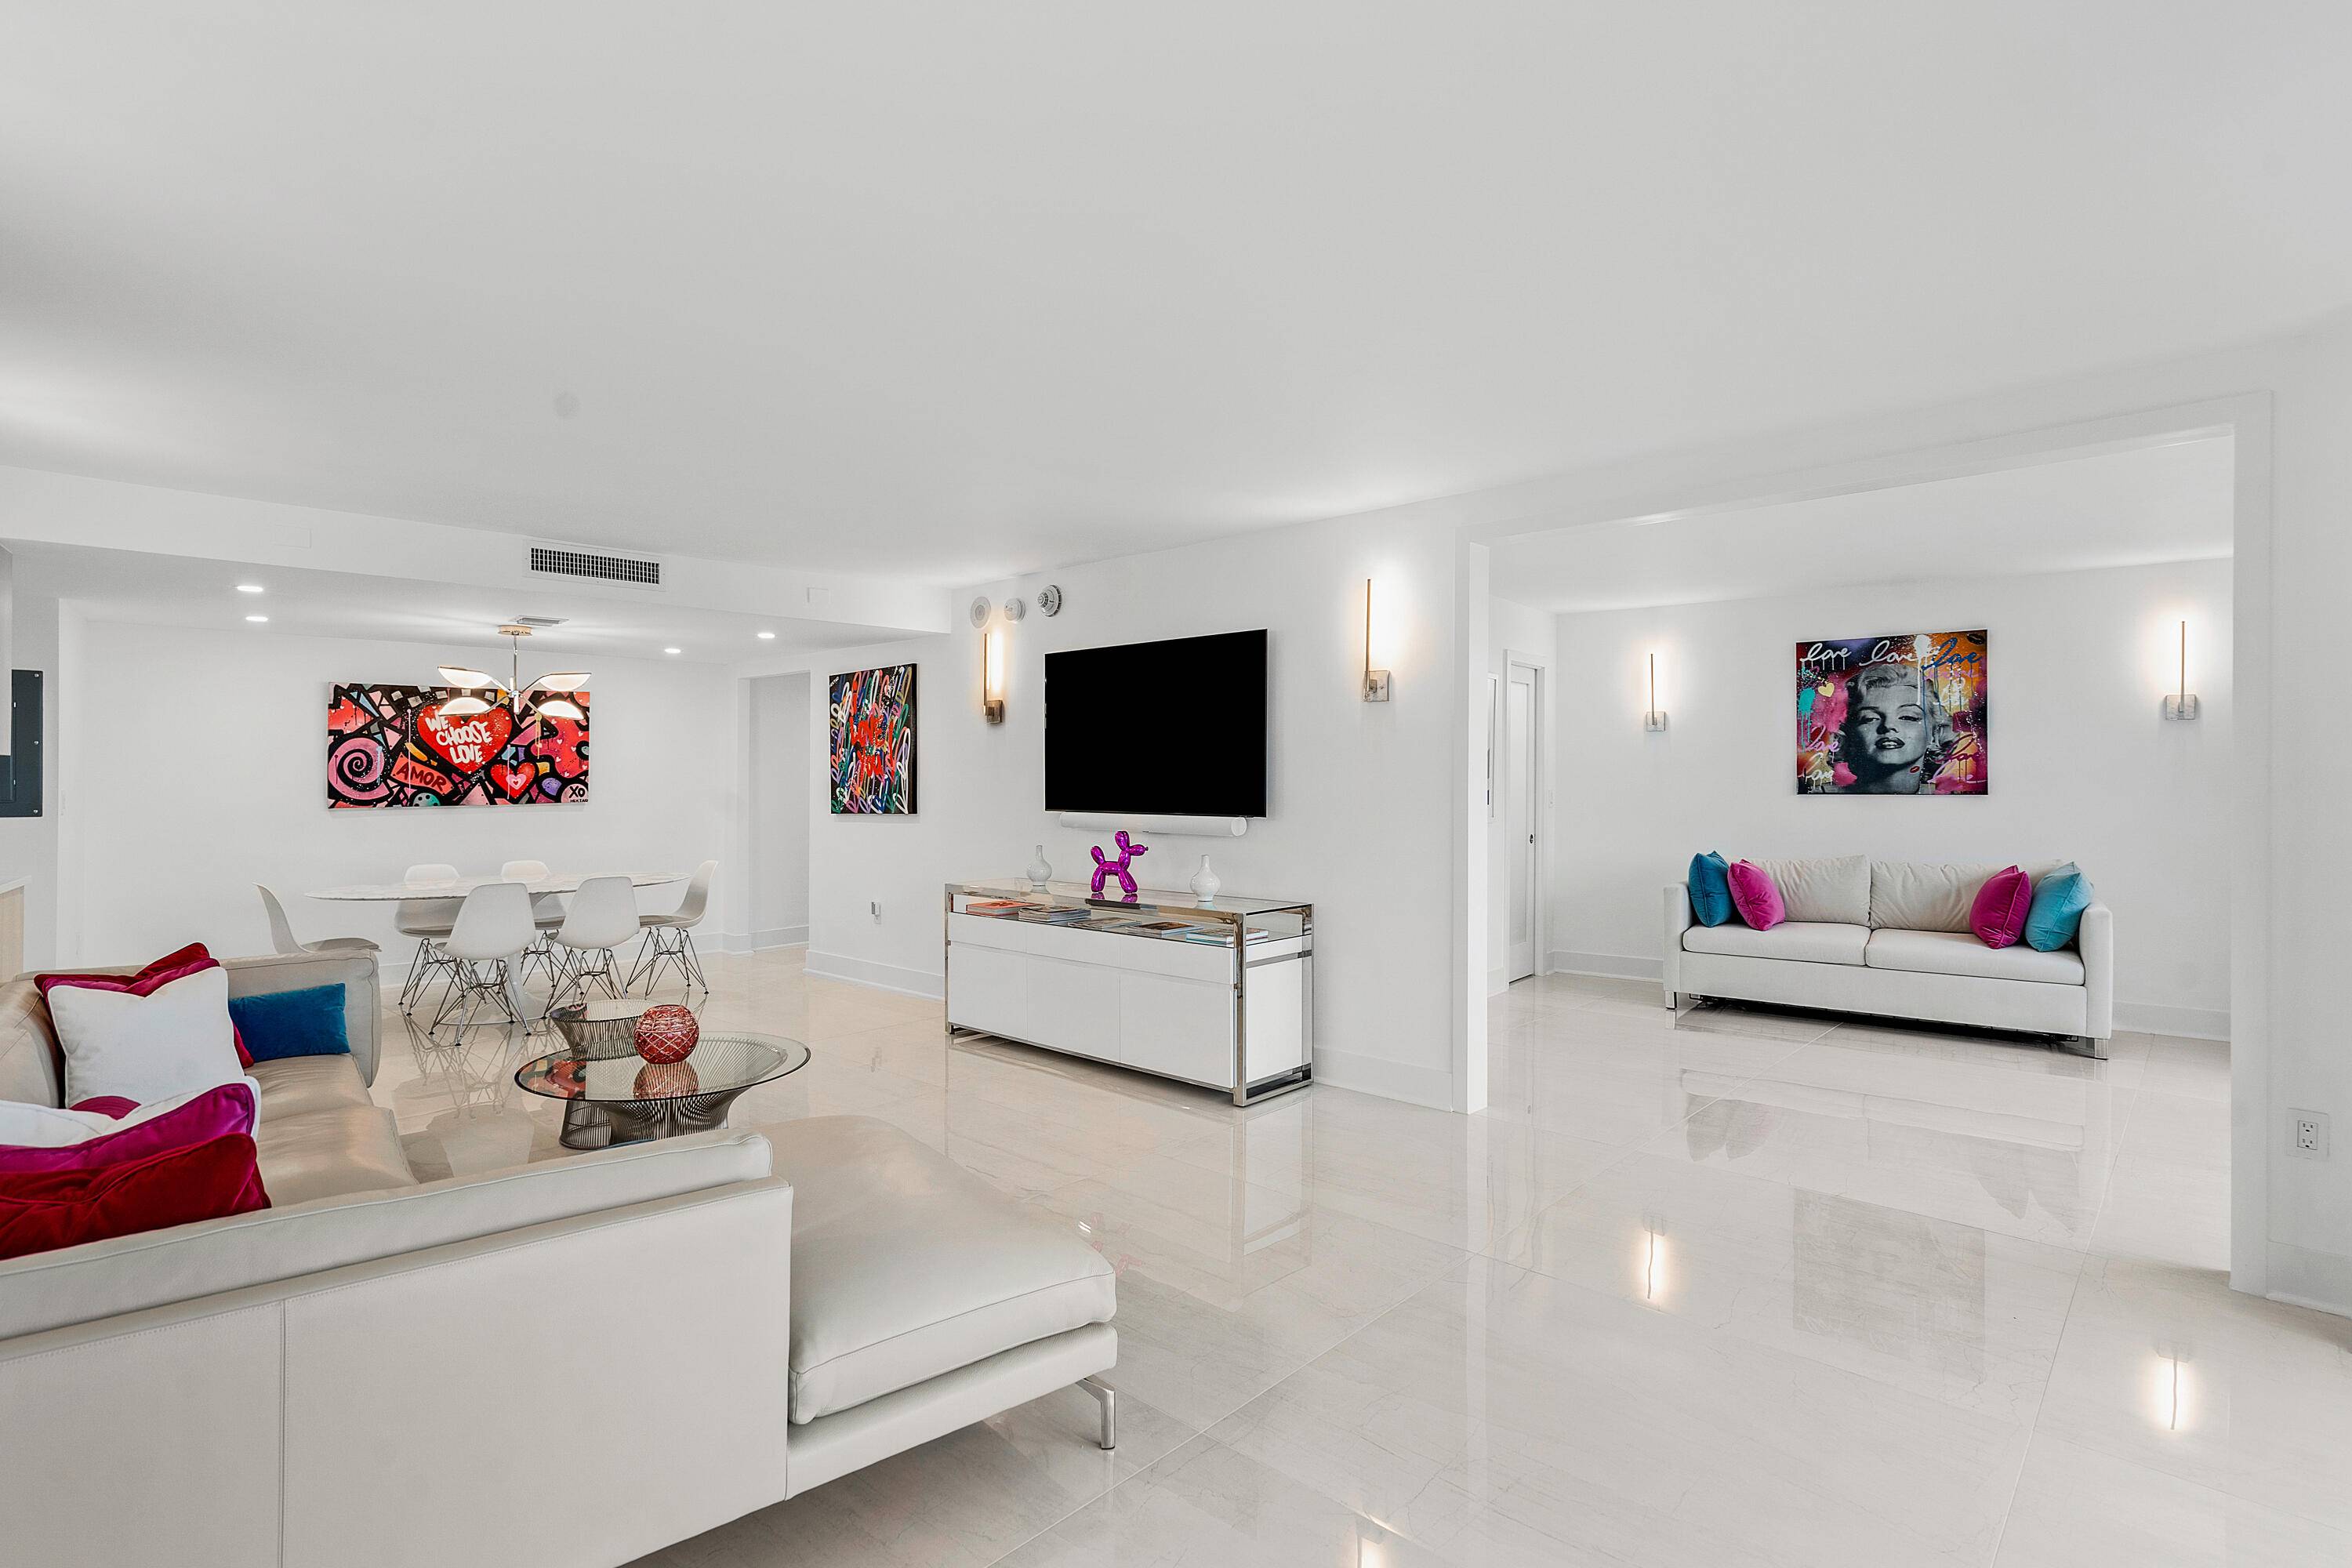 Unparalleled Luxury, NEWLY REBUILT Spacious modern 2BR 2B in the coveted 6 line of The Trianon, a famous landmark luxury waterfront property, triangulated amongst the most sought after opulent condominium ...